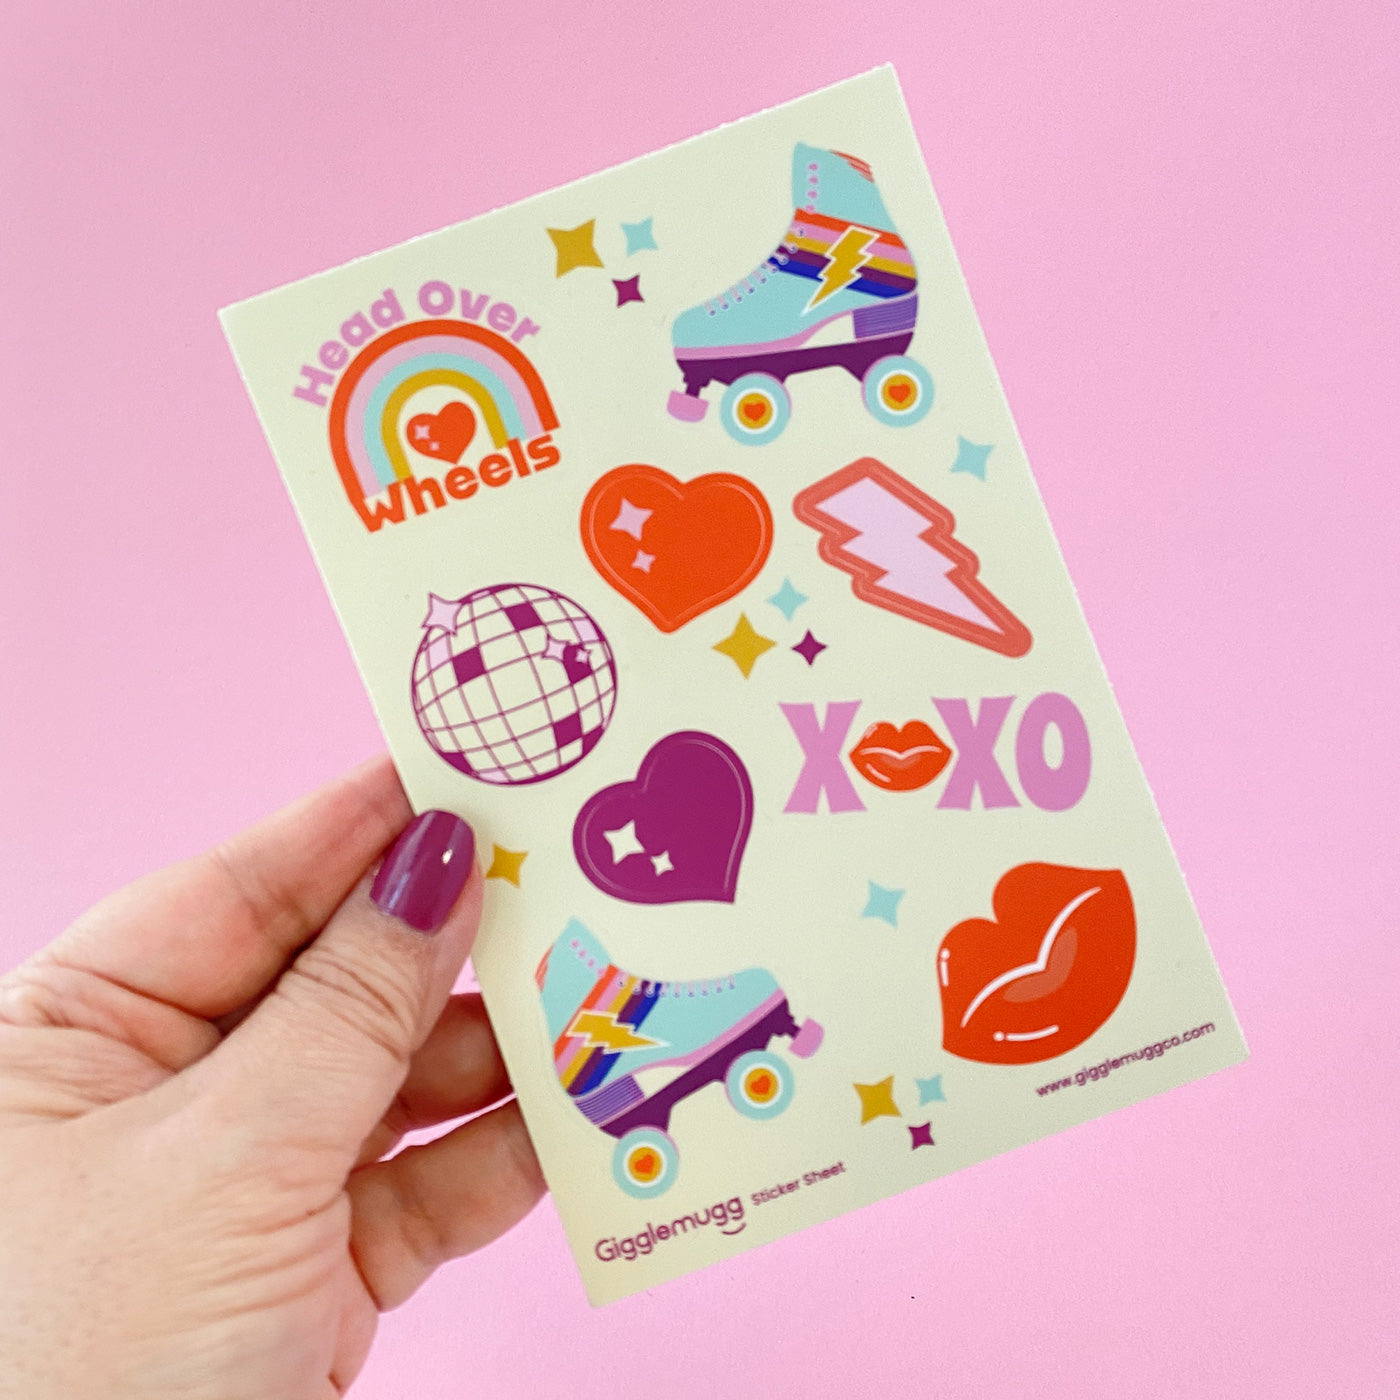 Roller skate sticker sheet with fun 80s-inspired design by Gigglemugg 